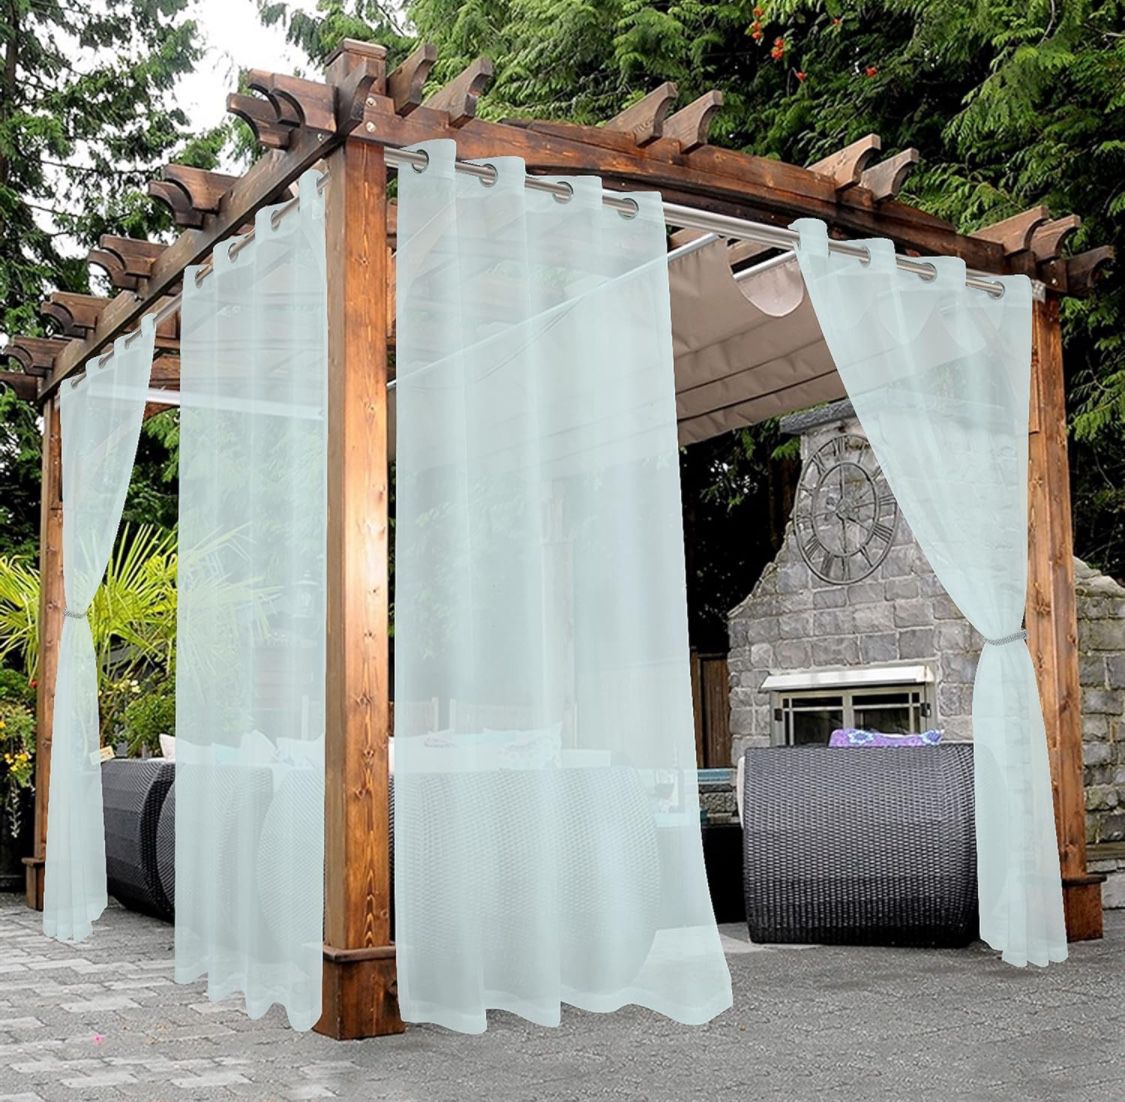 Sheer Outdoor Curtains for Patio Waterproof - 2 Panels Grommet Indoor Voile Curtains for Living Room, Bedroom, Porch, Pergola, Cabana, 54 x 95 inch, S